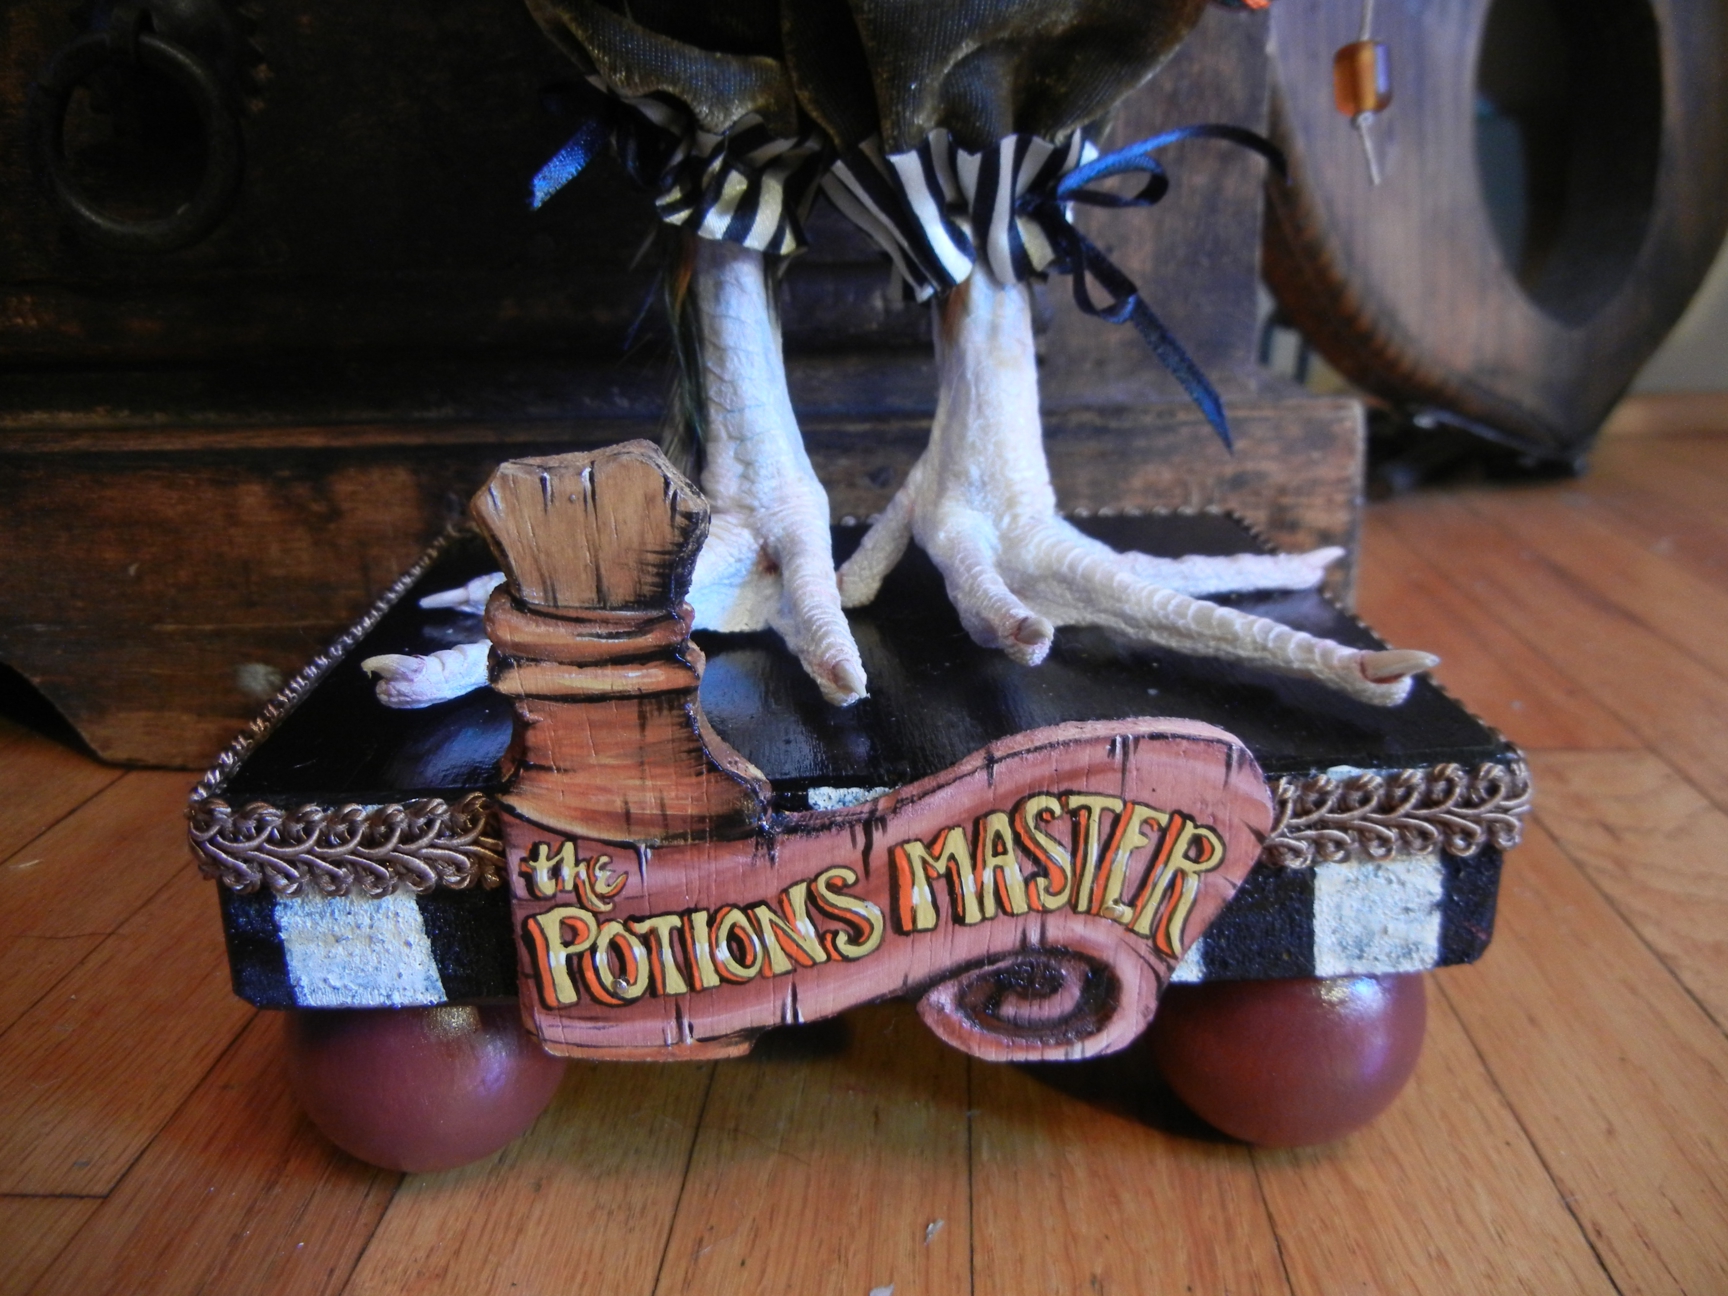 close-up detail taxidermy bird feet on painted black and white stripe wood platform with hand-painted lettered sign reading the Potions Master